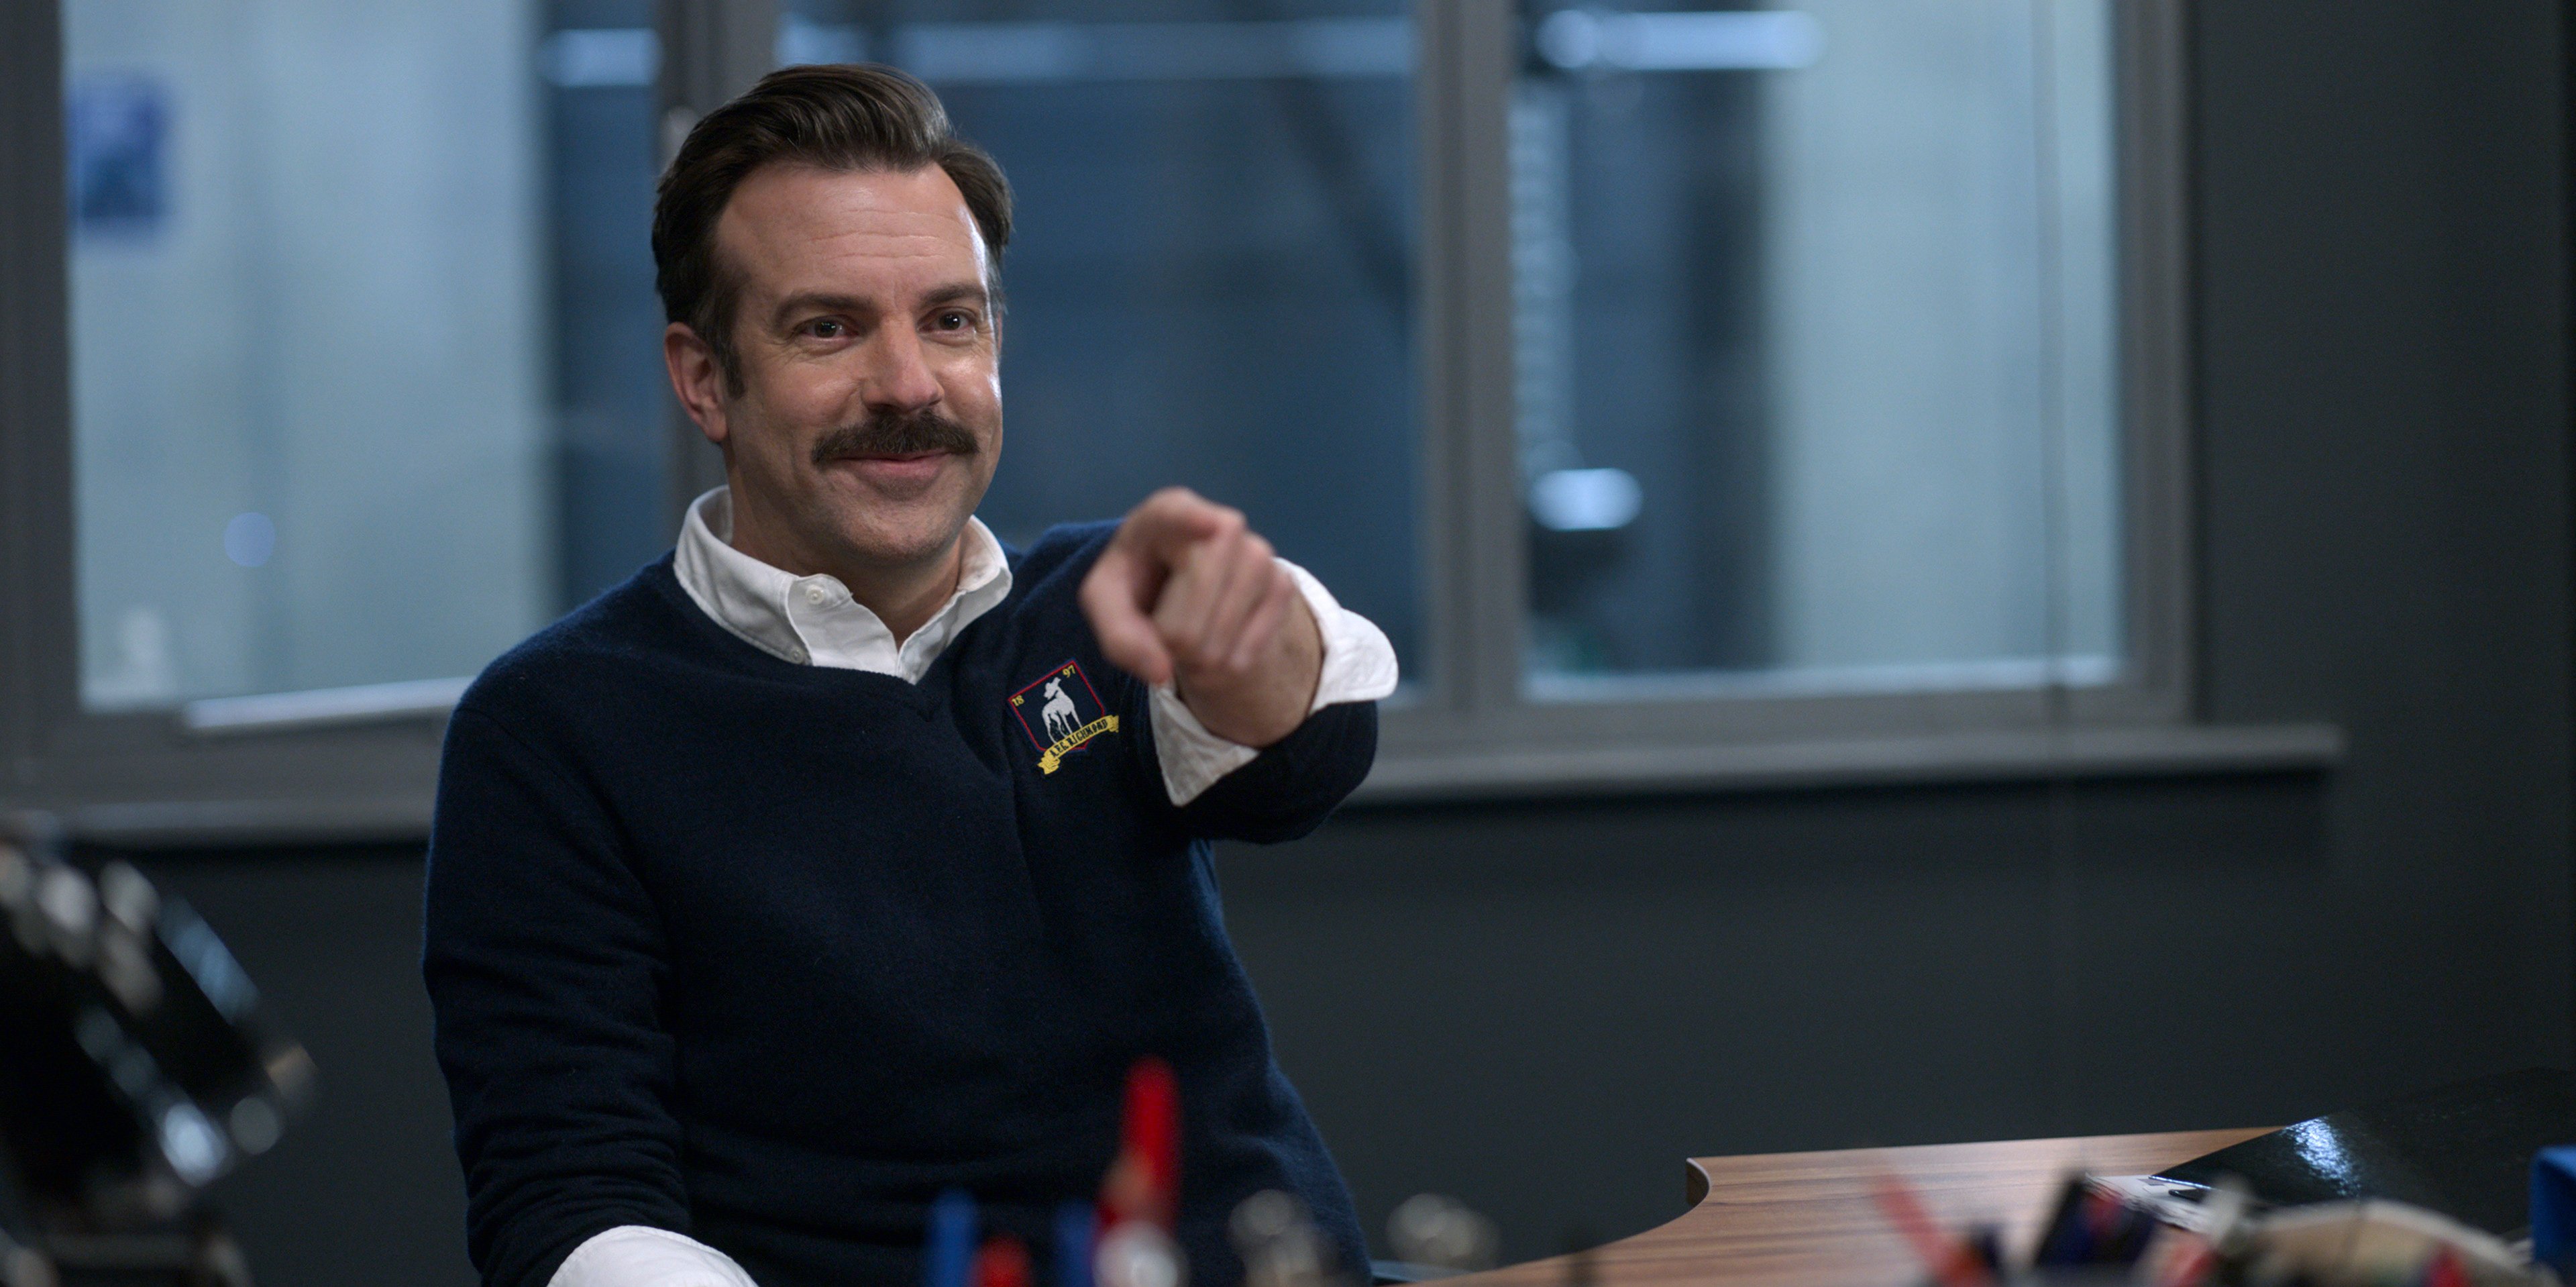 Ted Lasso (Jason Sudeikis) points emphatically in the first season of the Apple TV+ series